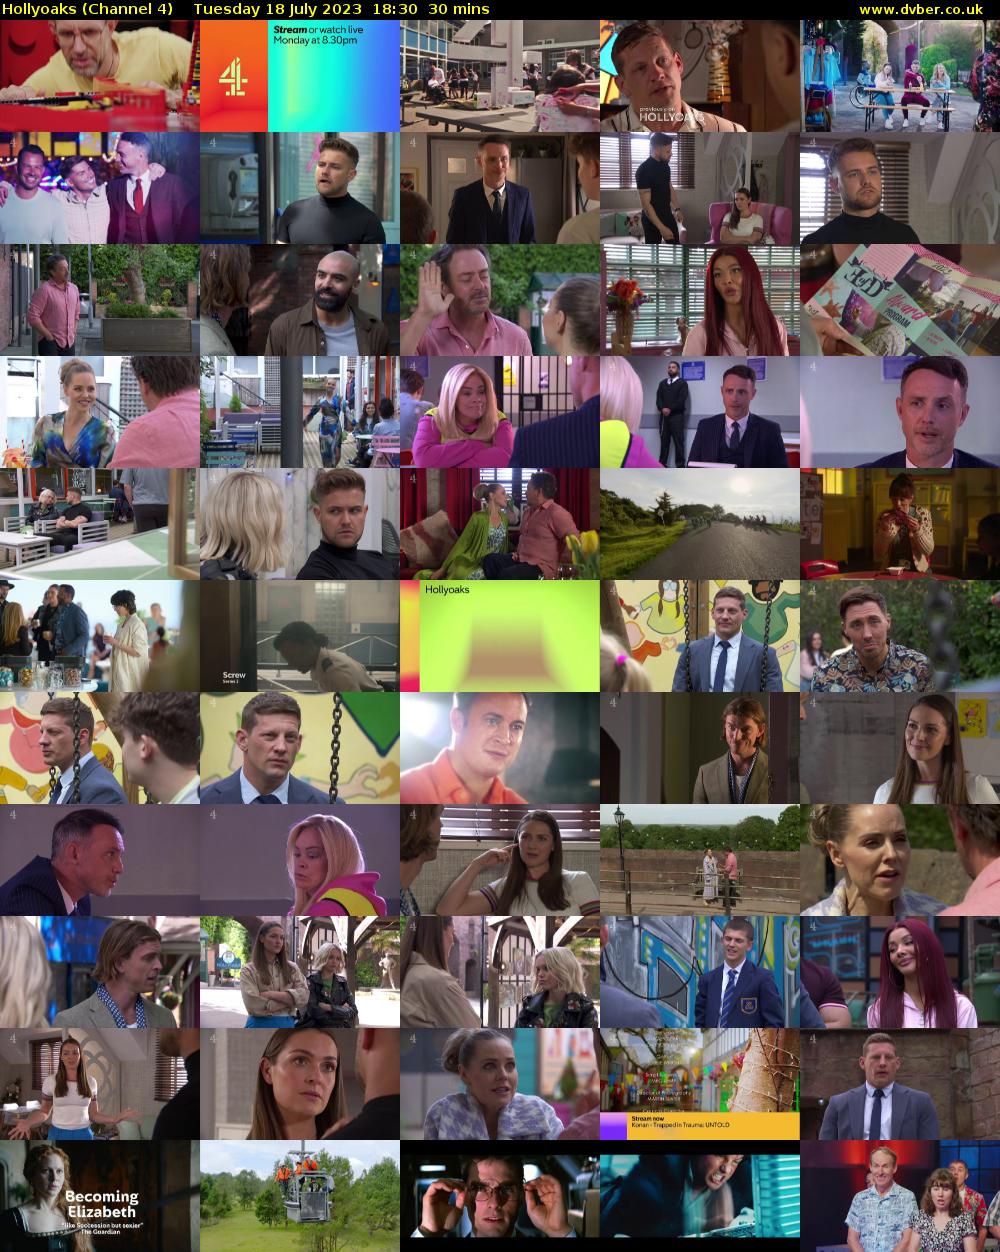 Hollyoaks (Channel 4) Tuesday 18 July 2023 18:30 - 19:00